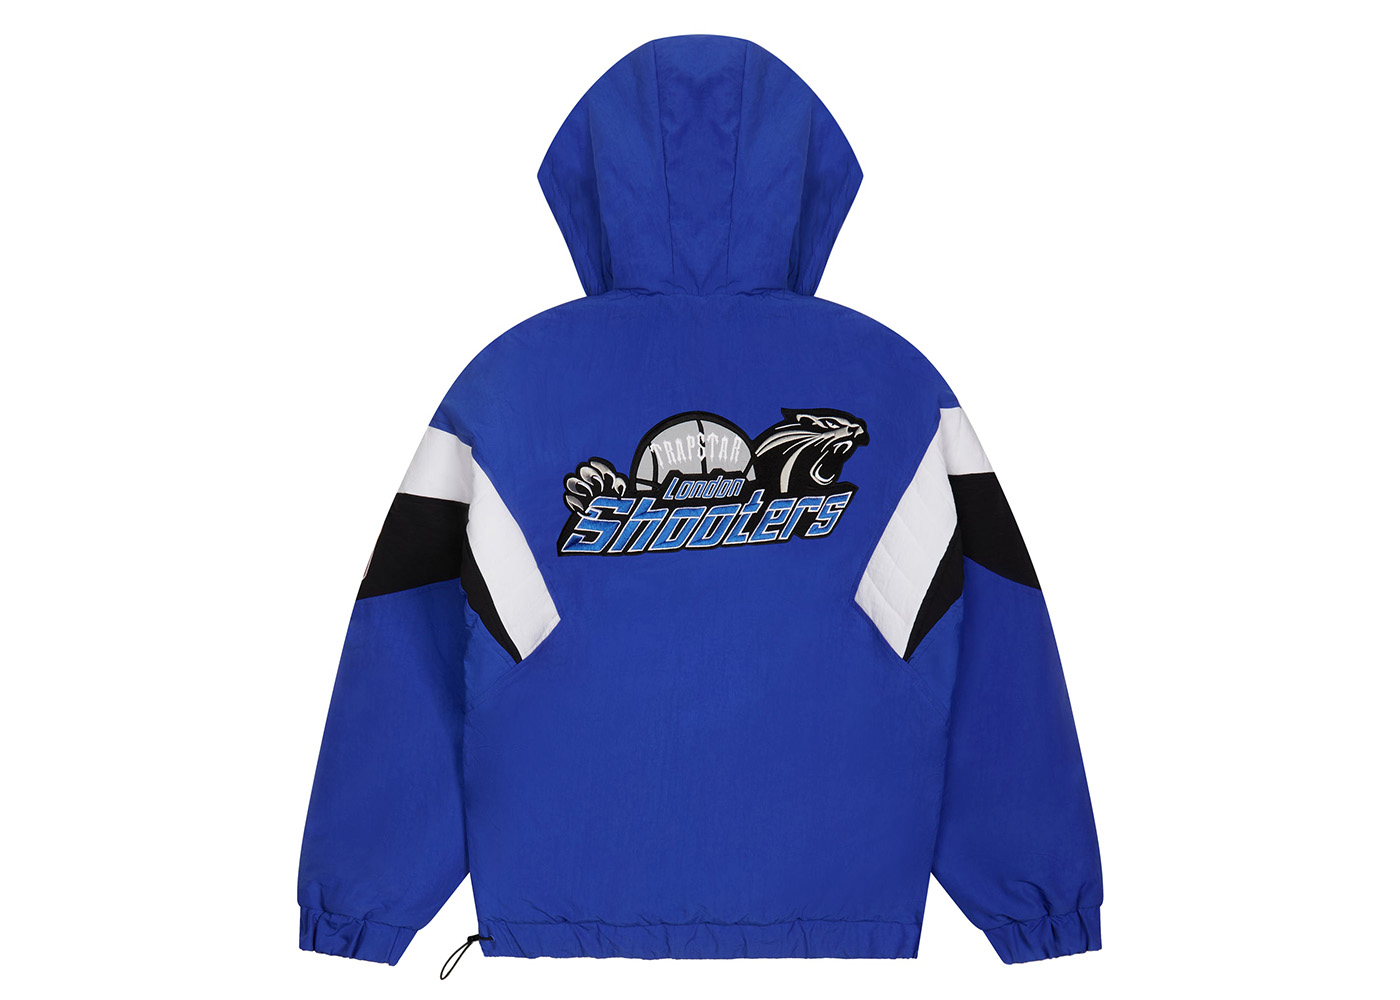 Trapstar Shooters 1/4 Zip Pullover Jacket Blue - FW22 メンズ - JP